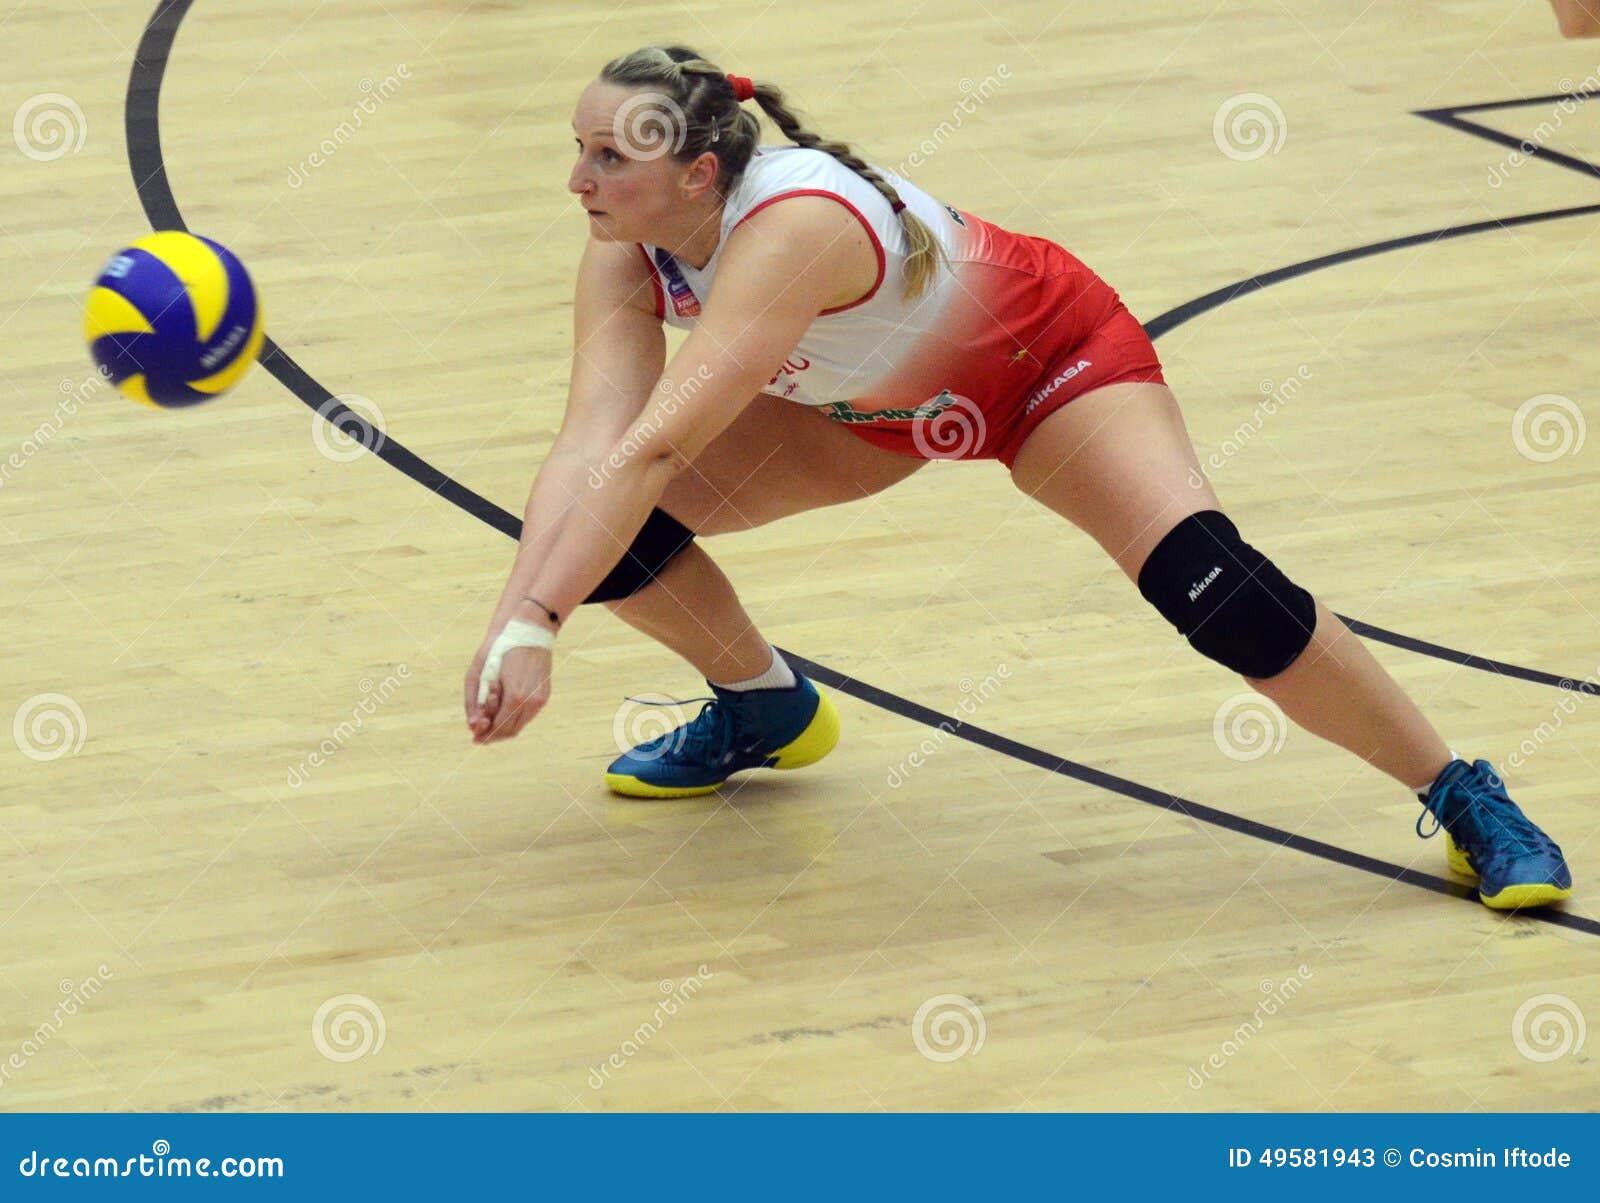 neef zone Onveilig Women volleyball action editorial stock photo. Image of blockout - 49581943